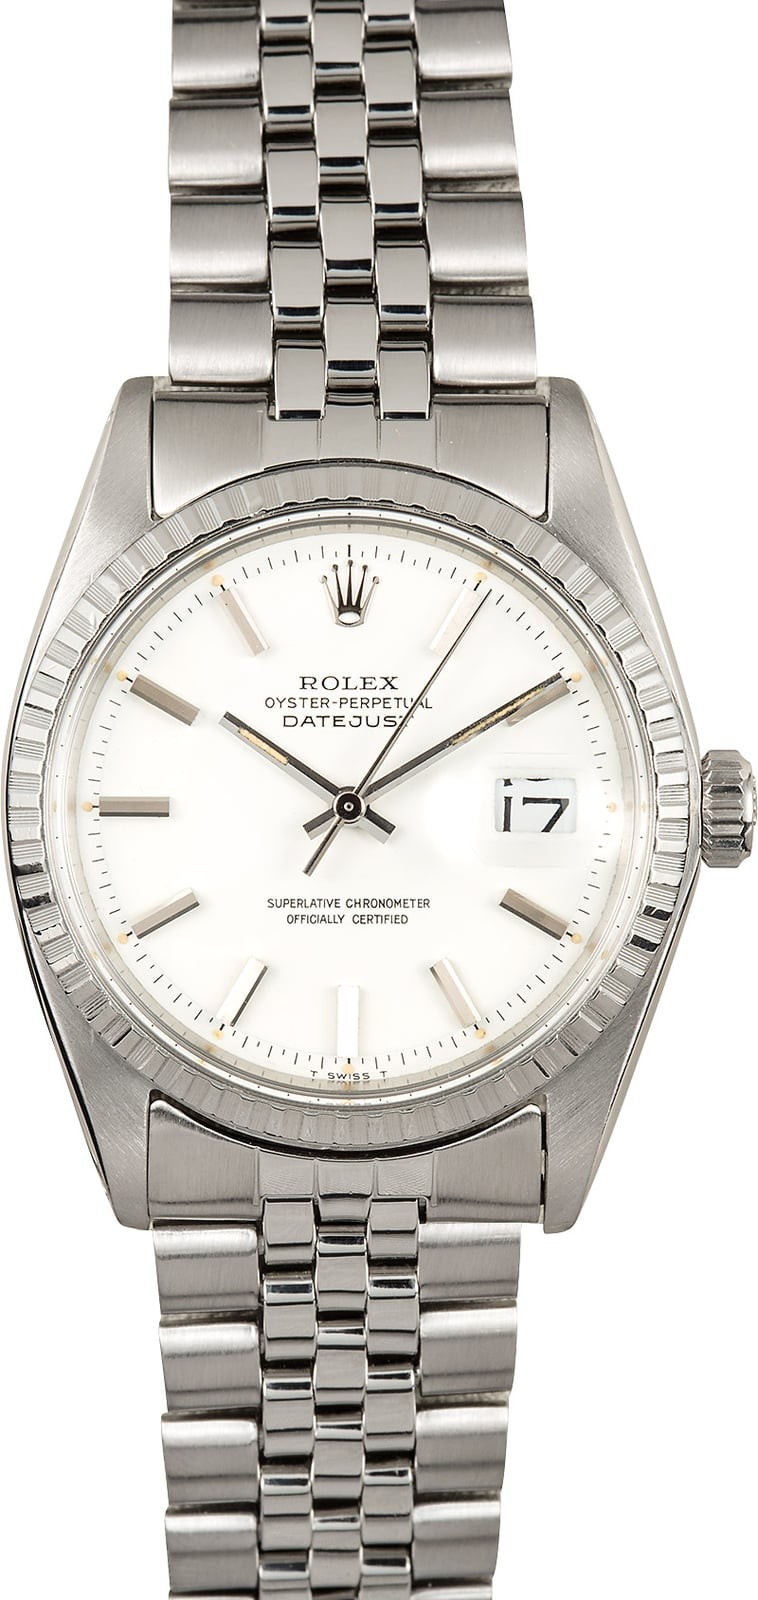 High Quality Imitation Rolex Datejust 1603 Stainless WE04348